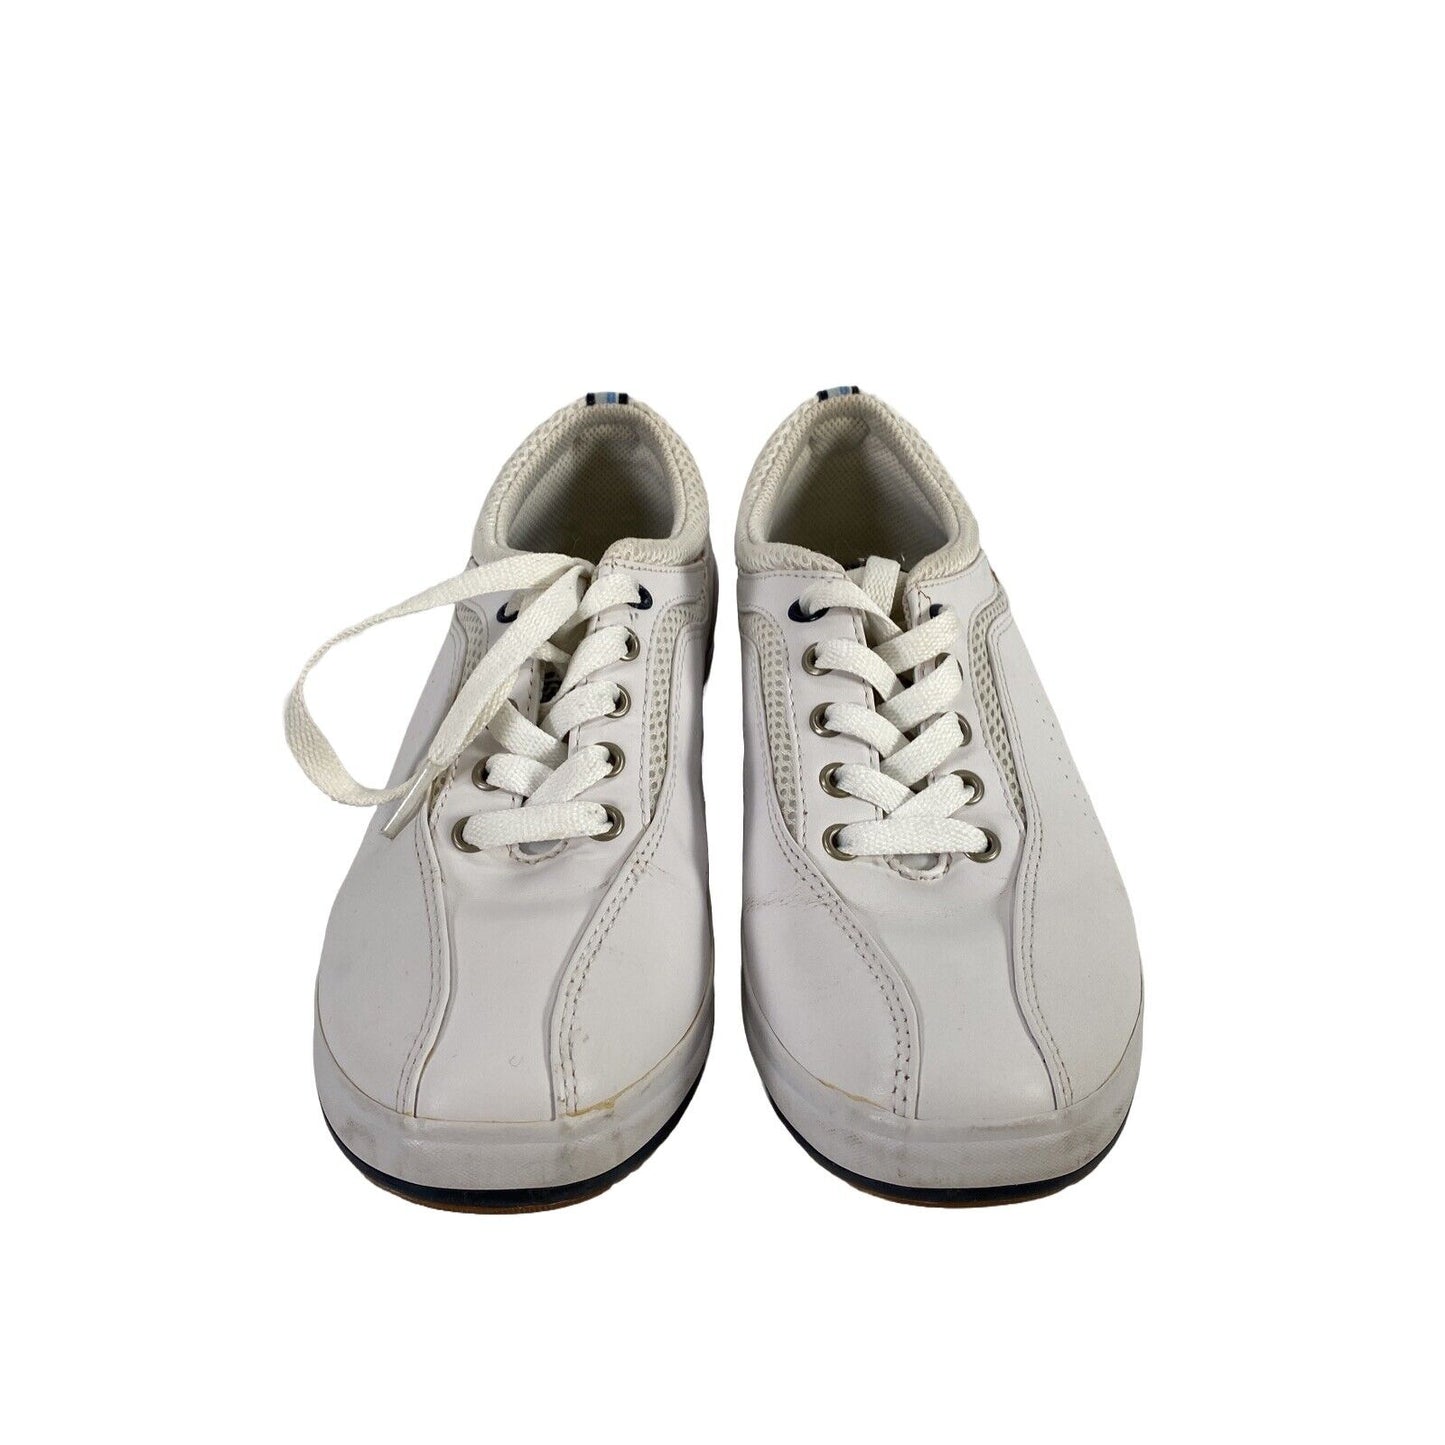 Keds Women's White Leather Champion Lace Up Sneakers - 7